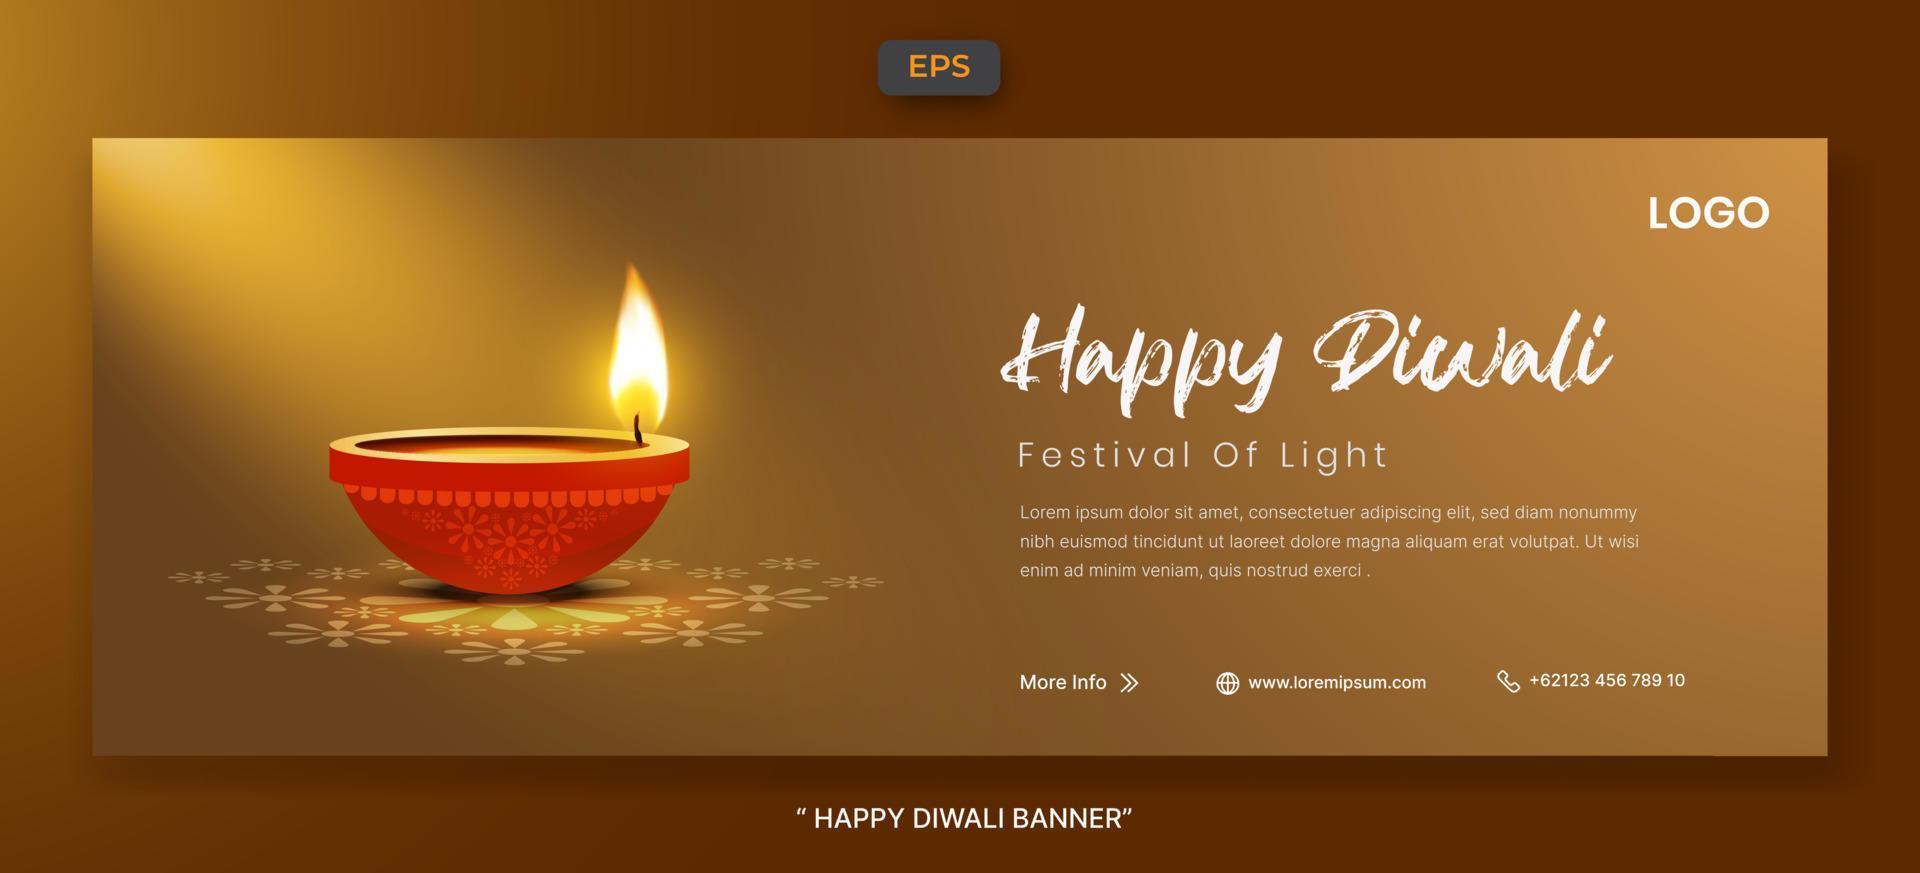 Happy diwali festival of lights with realistic oil lamp element web banner template vector